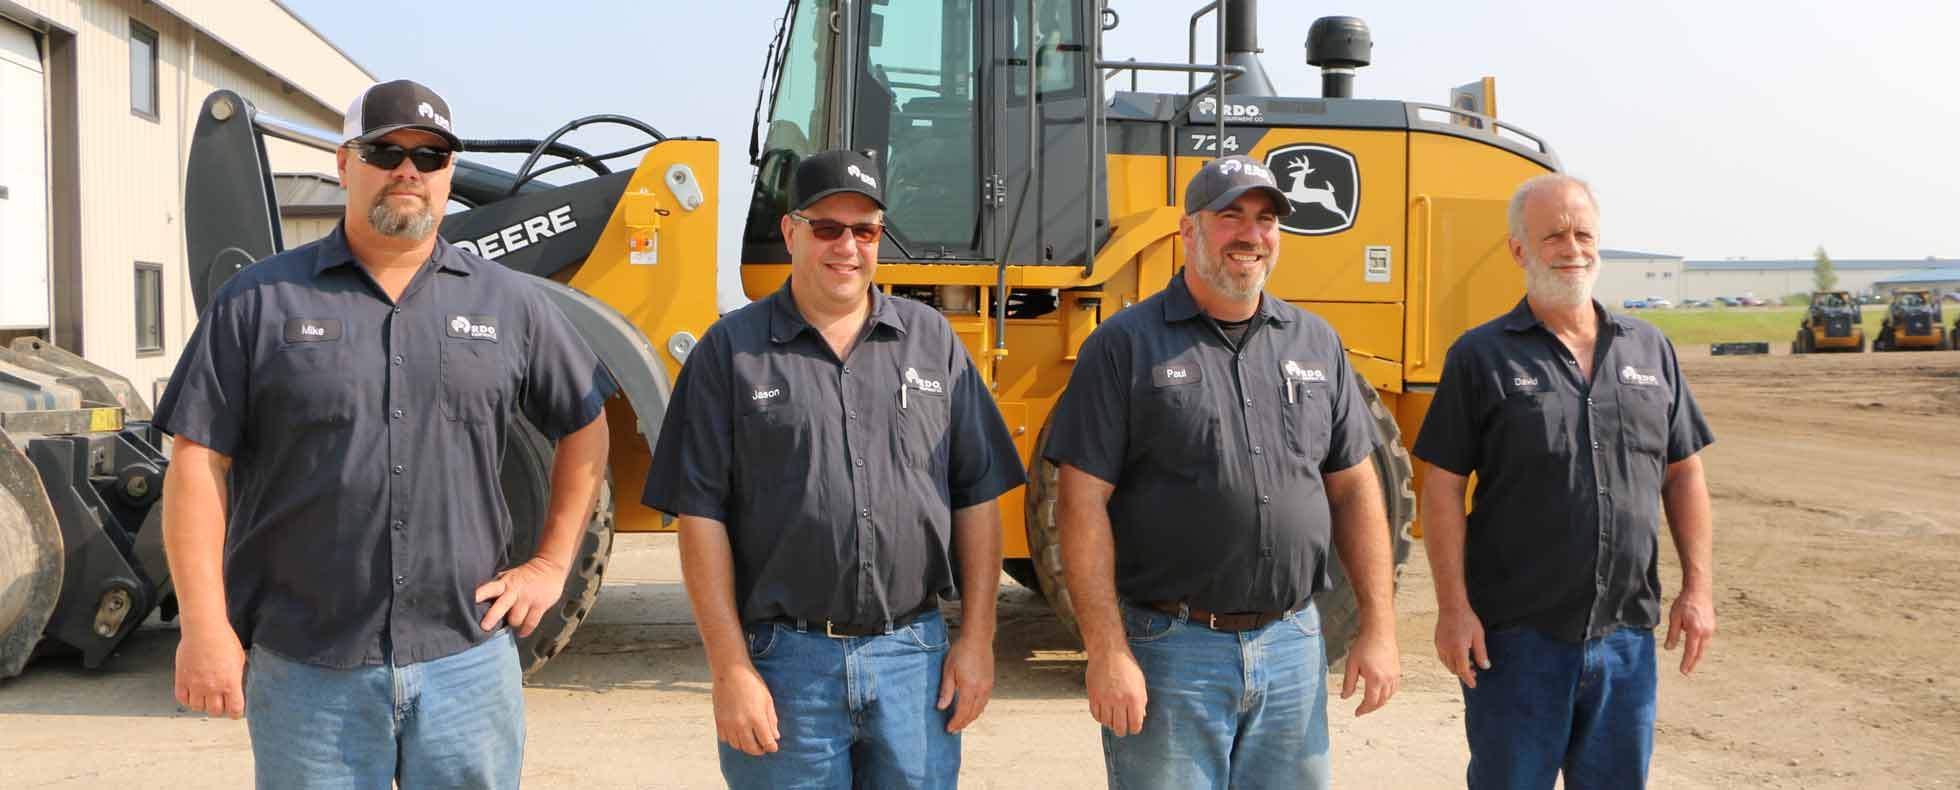 4 Longtime Service Technicians Share Lessons to Inspire the Equipment Industry Workforce